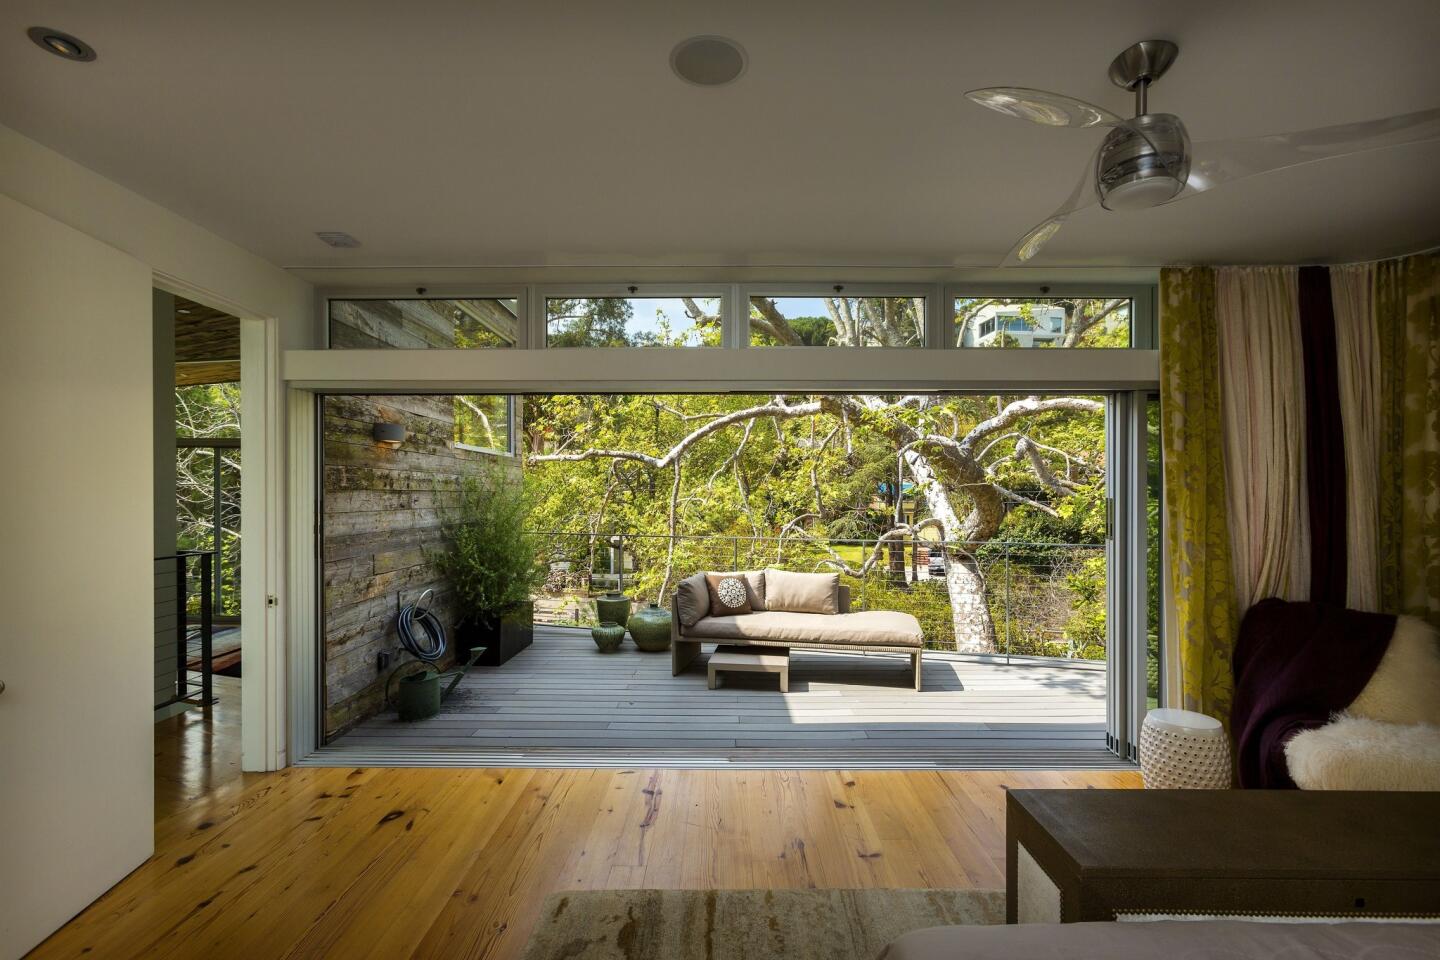 A natural beauty in Rustic Canyon